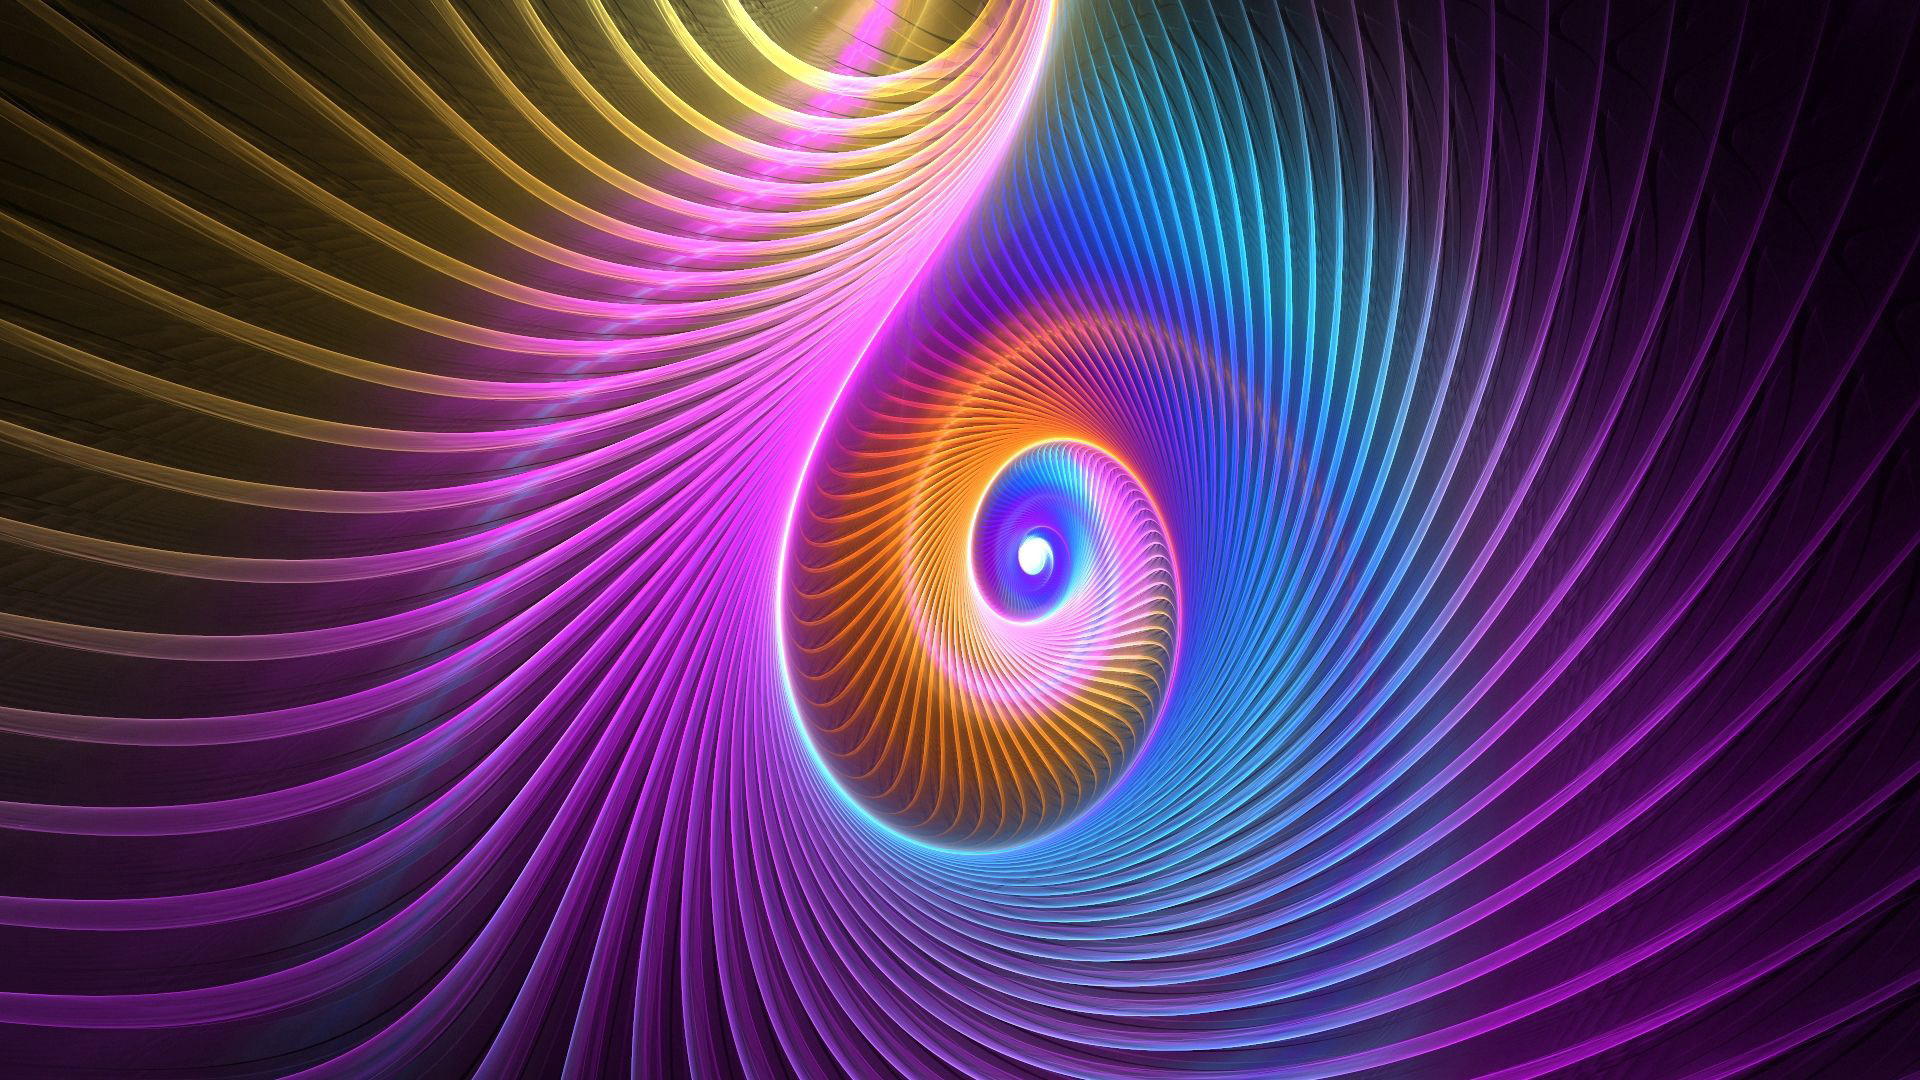 D Bright Fractal Feather 2K Abstract